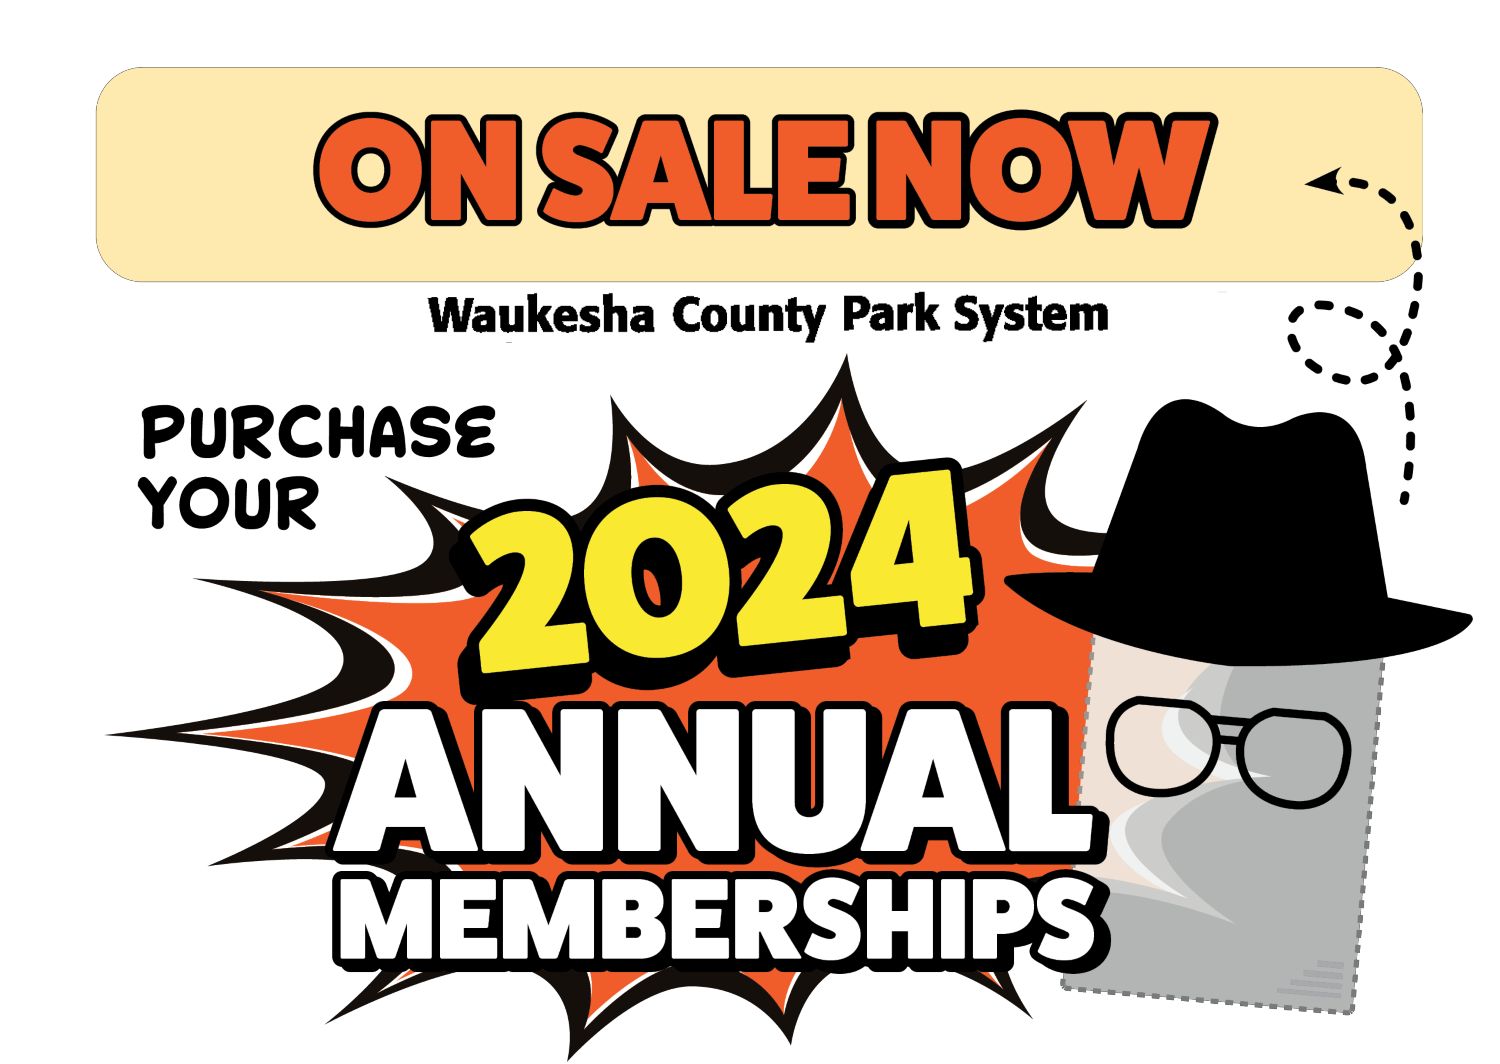 Click here to purchase Annual Memberships in the Waukesha County Parks online store